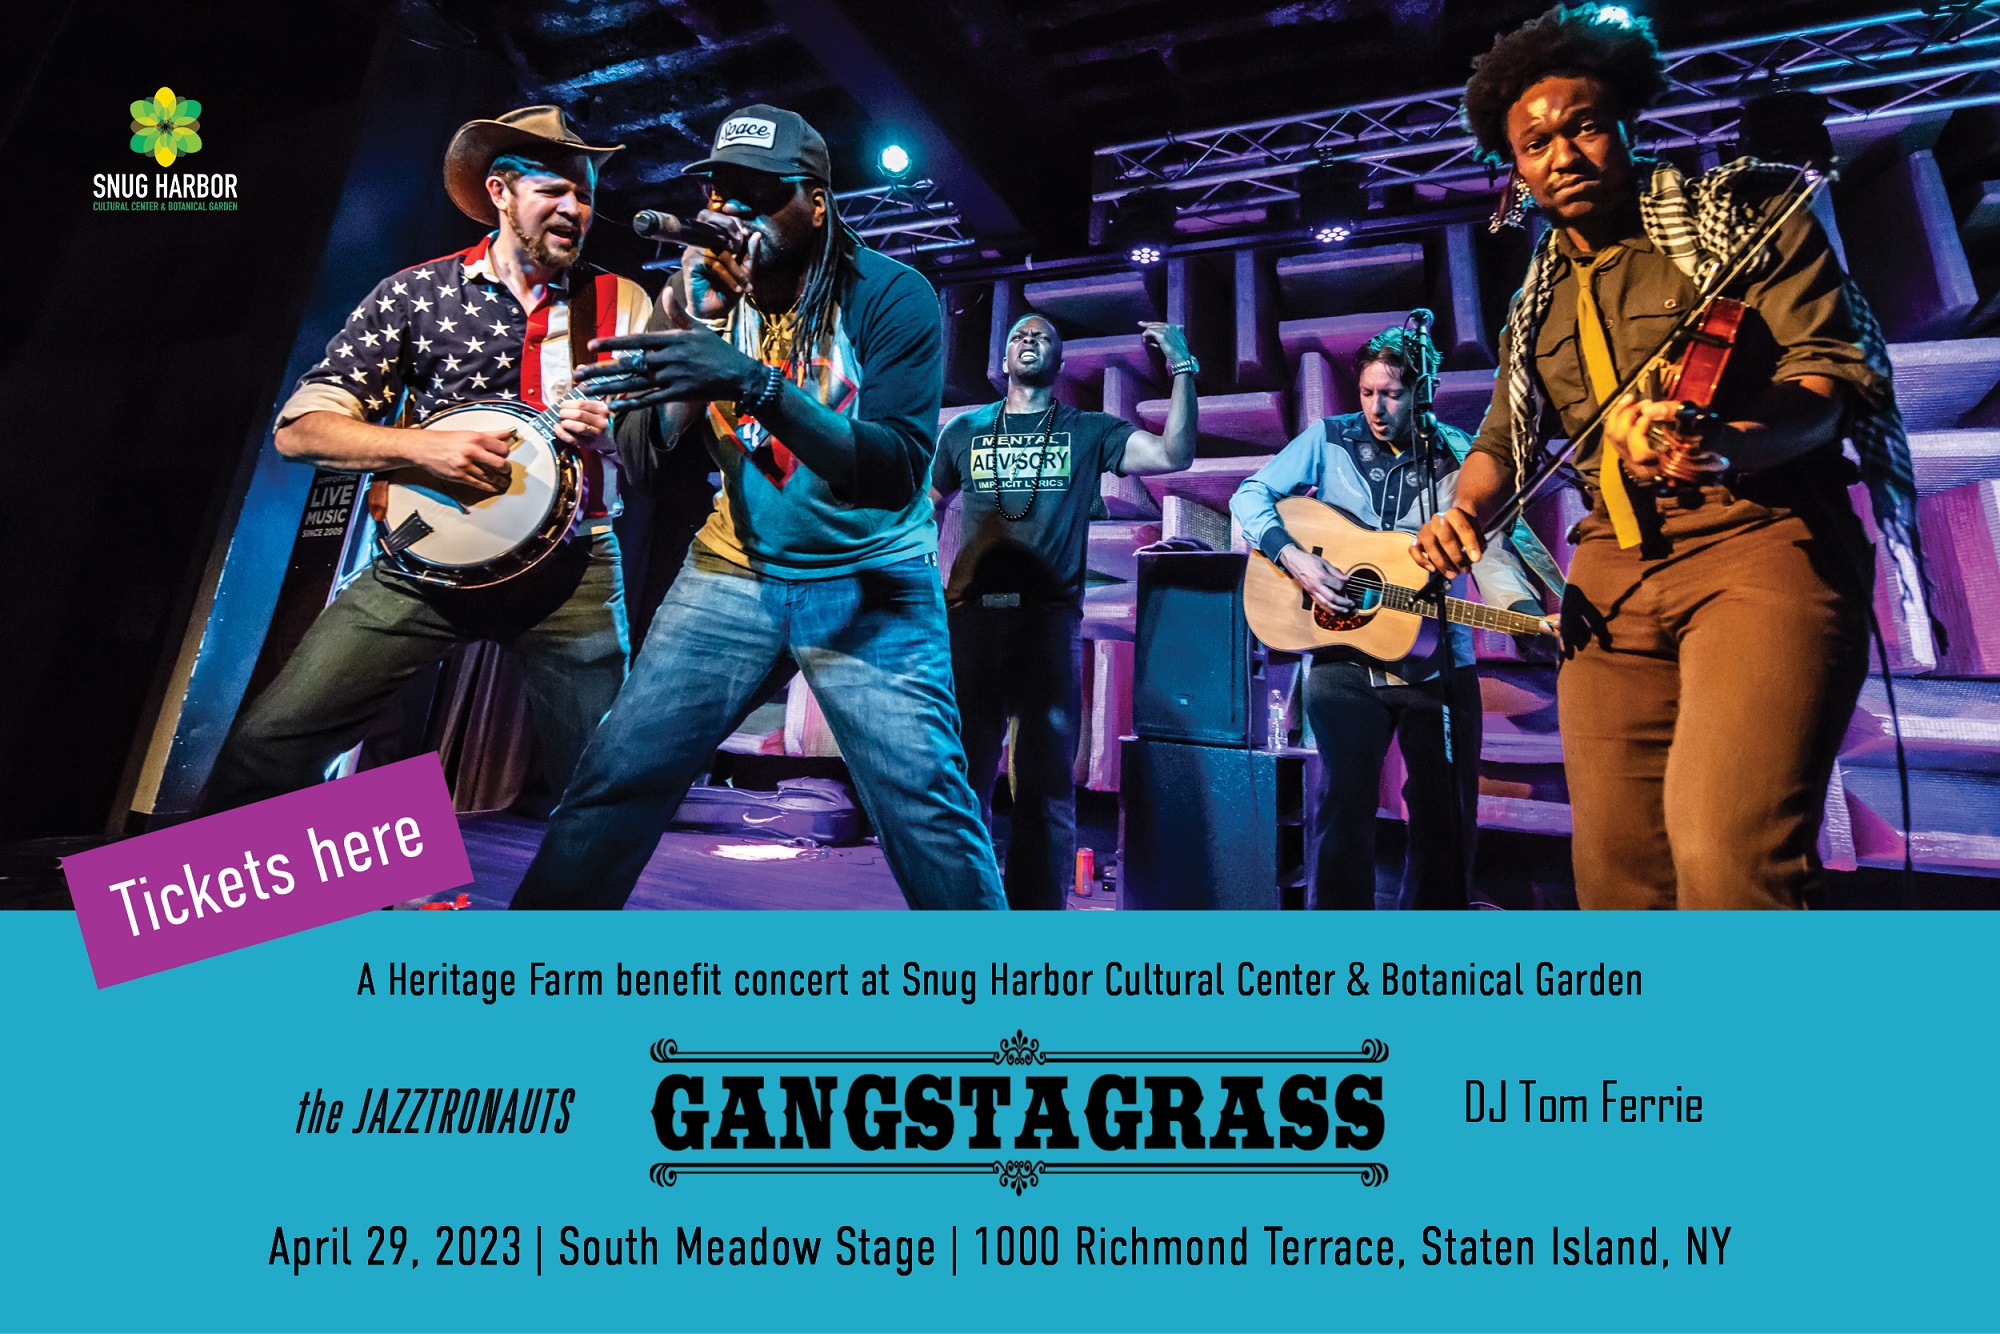 Snug Harbor Cultural Center & Botanical Garden Announces  Gangstagrass: A Heritage Farm Benefit Concert with Live Music and Food Trucks on Saturday, April 29, 2023